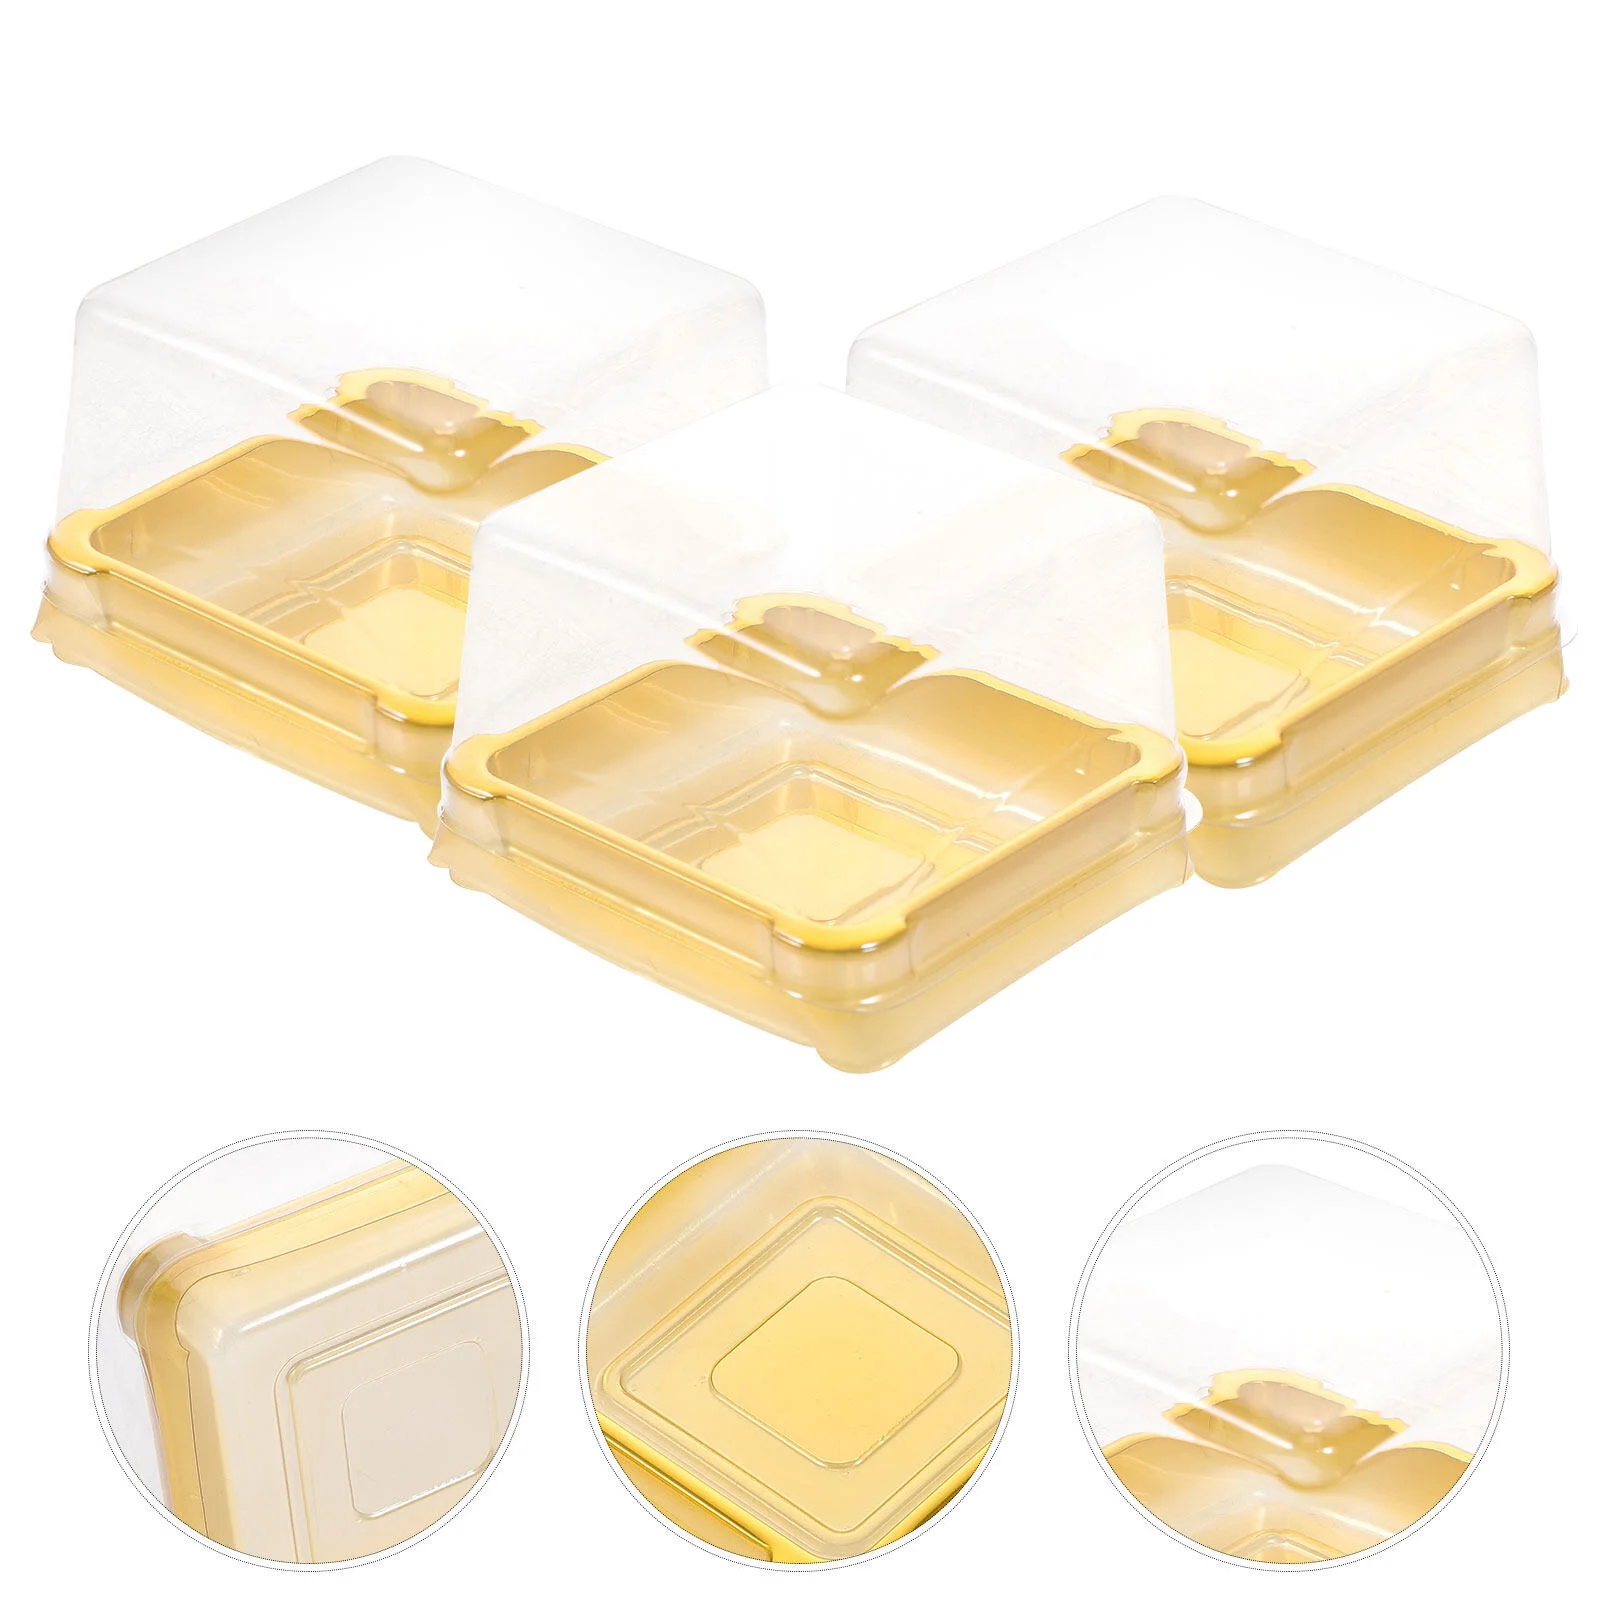 

50 Pcs Mooncake Packing Cheese Container Stand Egg Yolk Crisp Box Boxes Baby Round Gift